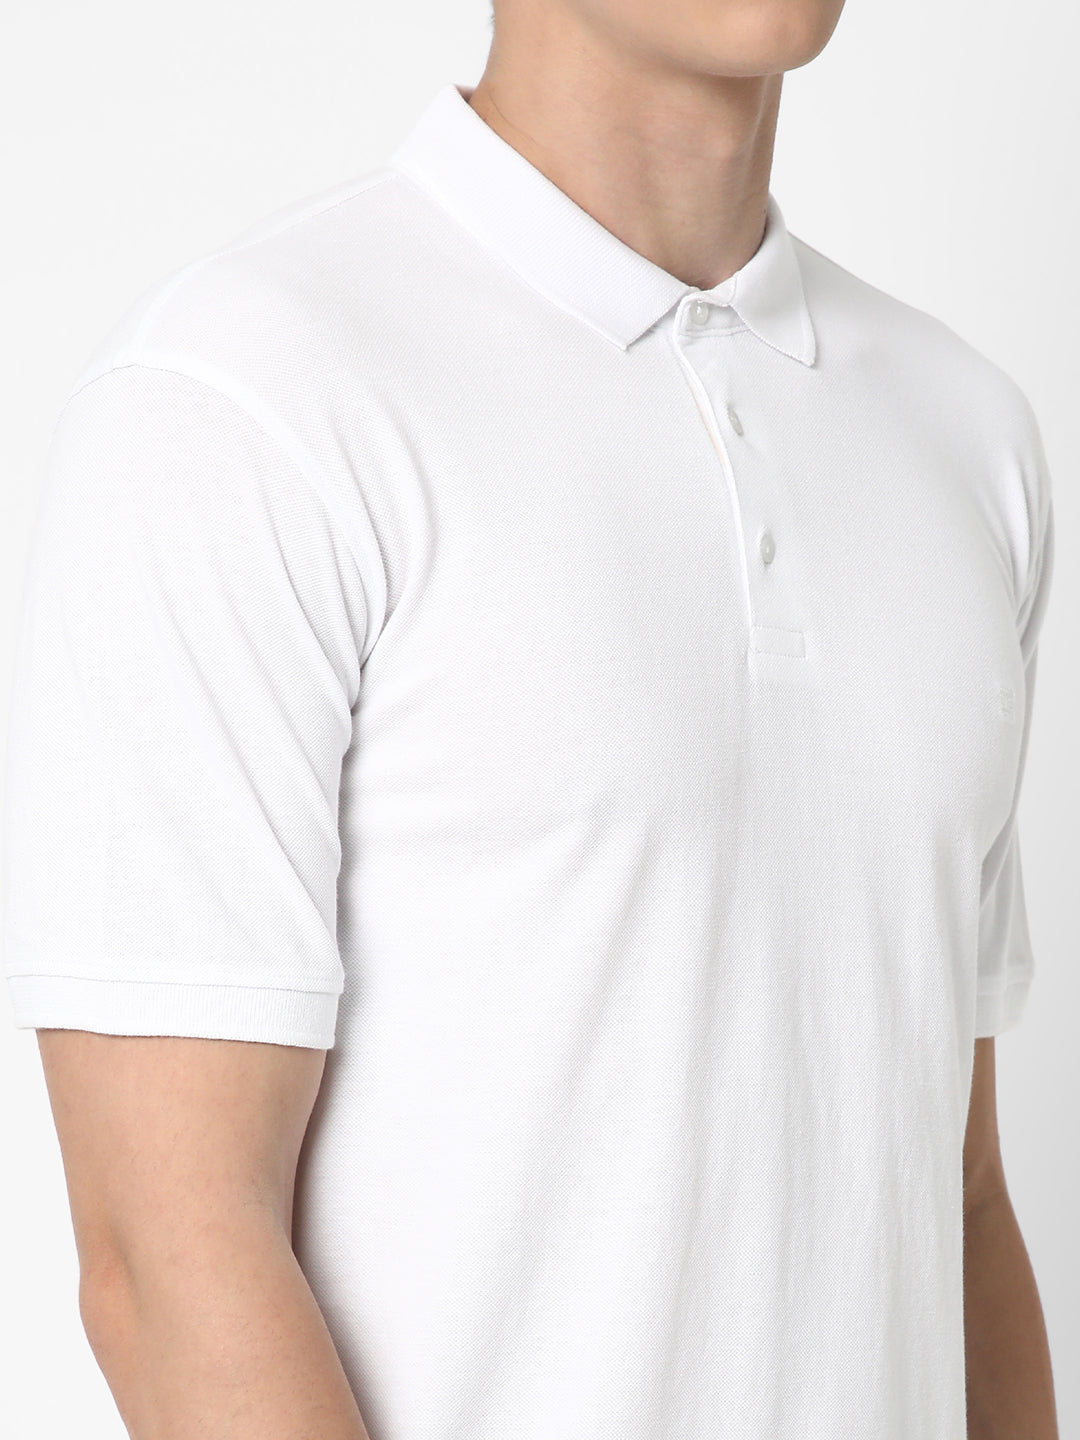 Cotstyle Cotton Fabrics Polo Short Length Plain Half Sleeve Casual & Daily Wear Men's T Shirts - Pack of 1 - White Colour